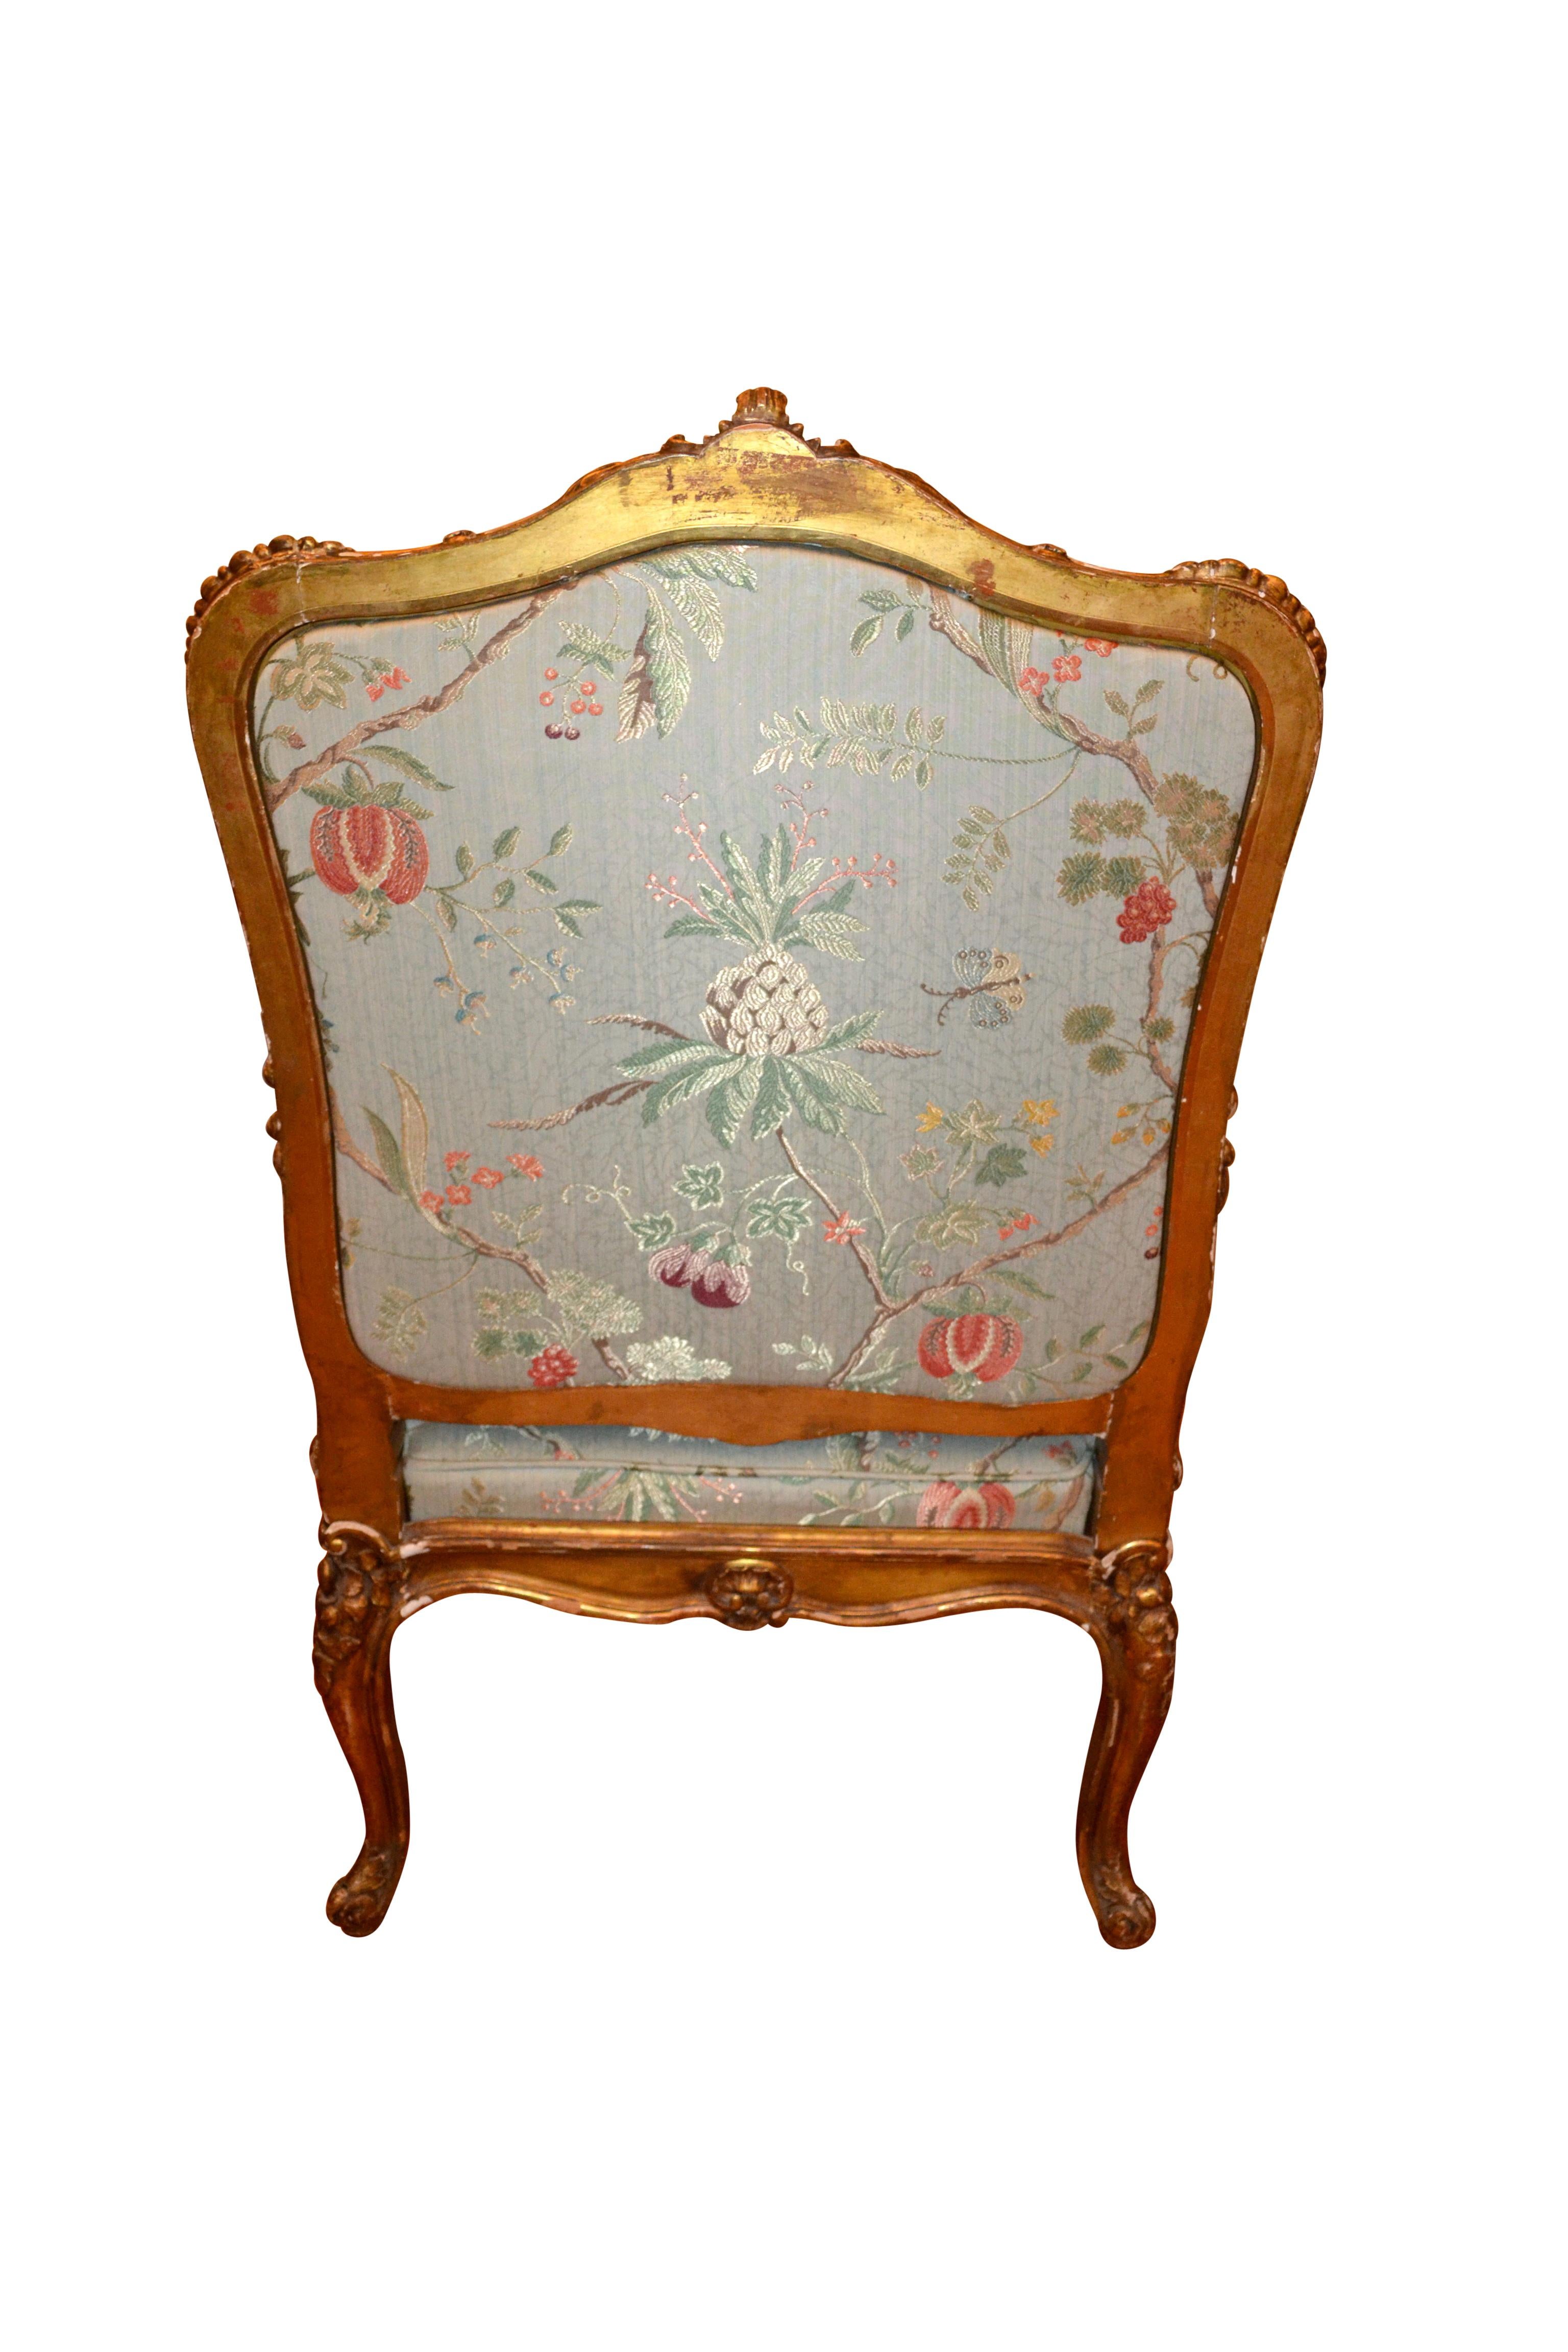 Carved Gilt Framed Louis XV Style Bergere Chair